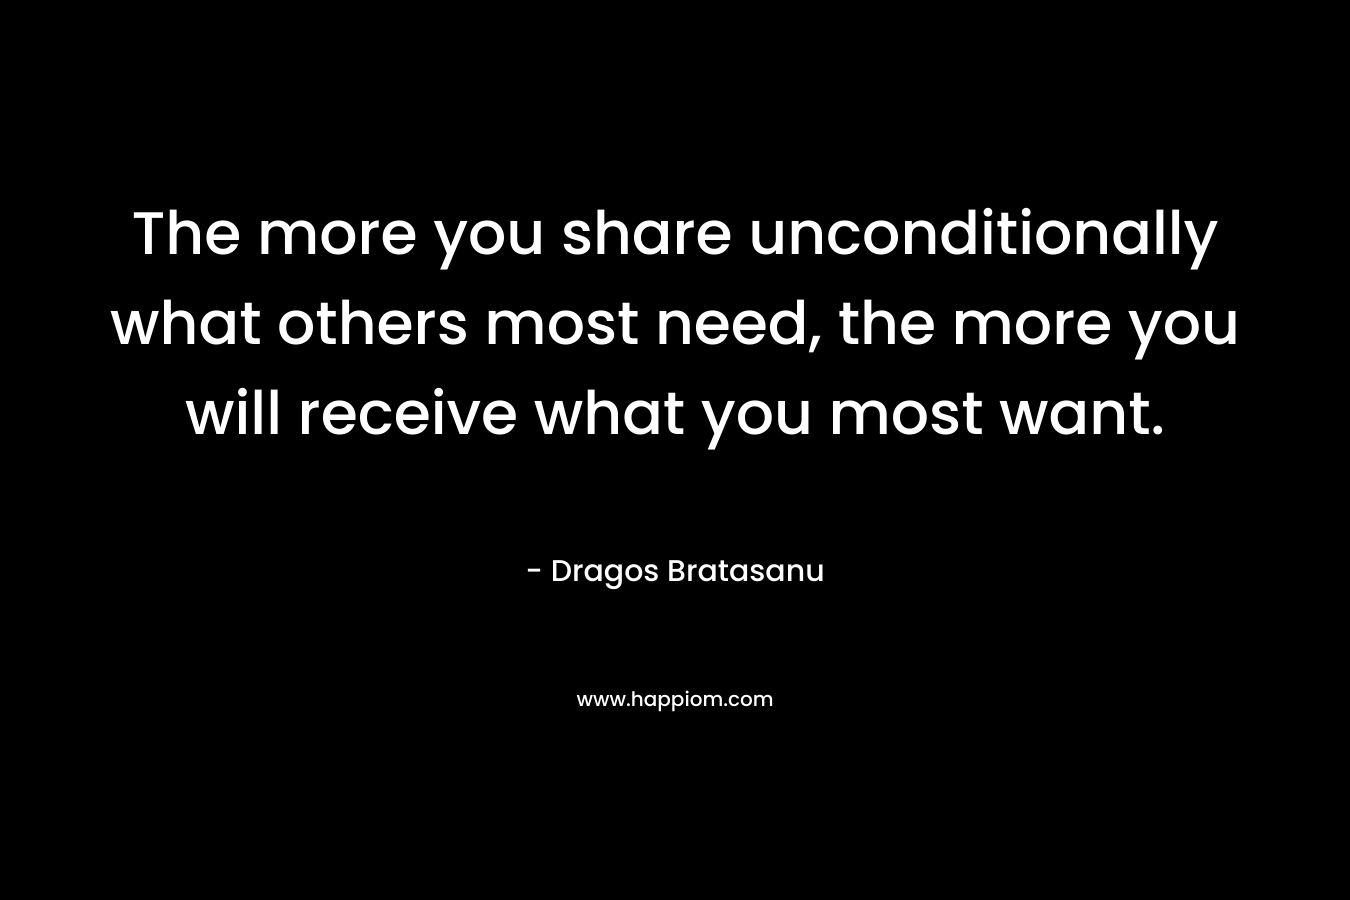 The more you share unconditionally what others most need, the more you will receive what you most want. – Dragos Bratasanu